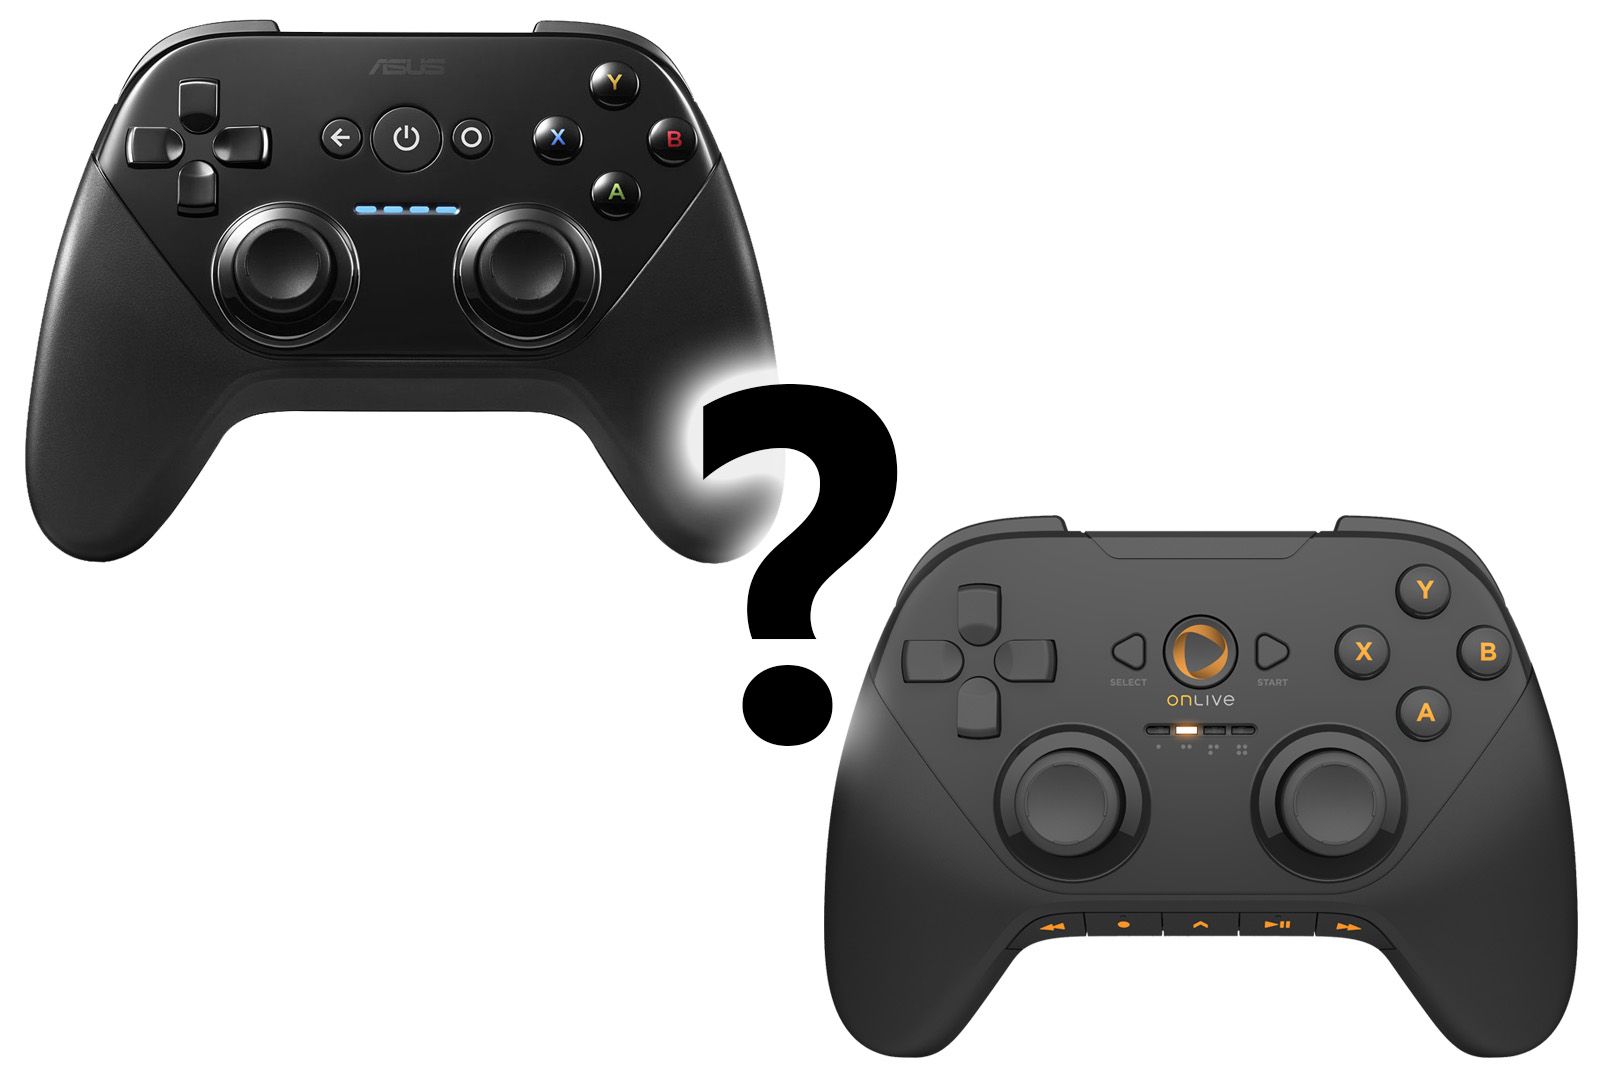 snap could nexus player gamepad’s uncanny similarity to onlive controller mean app is inbound  image 1